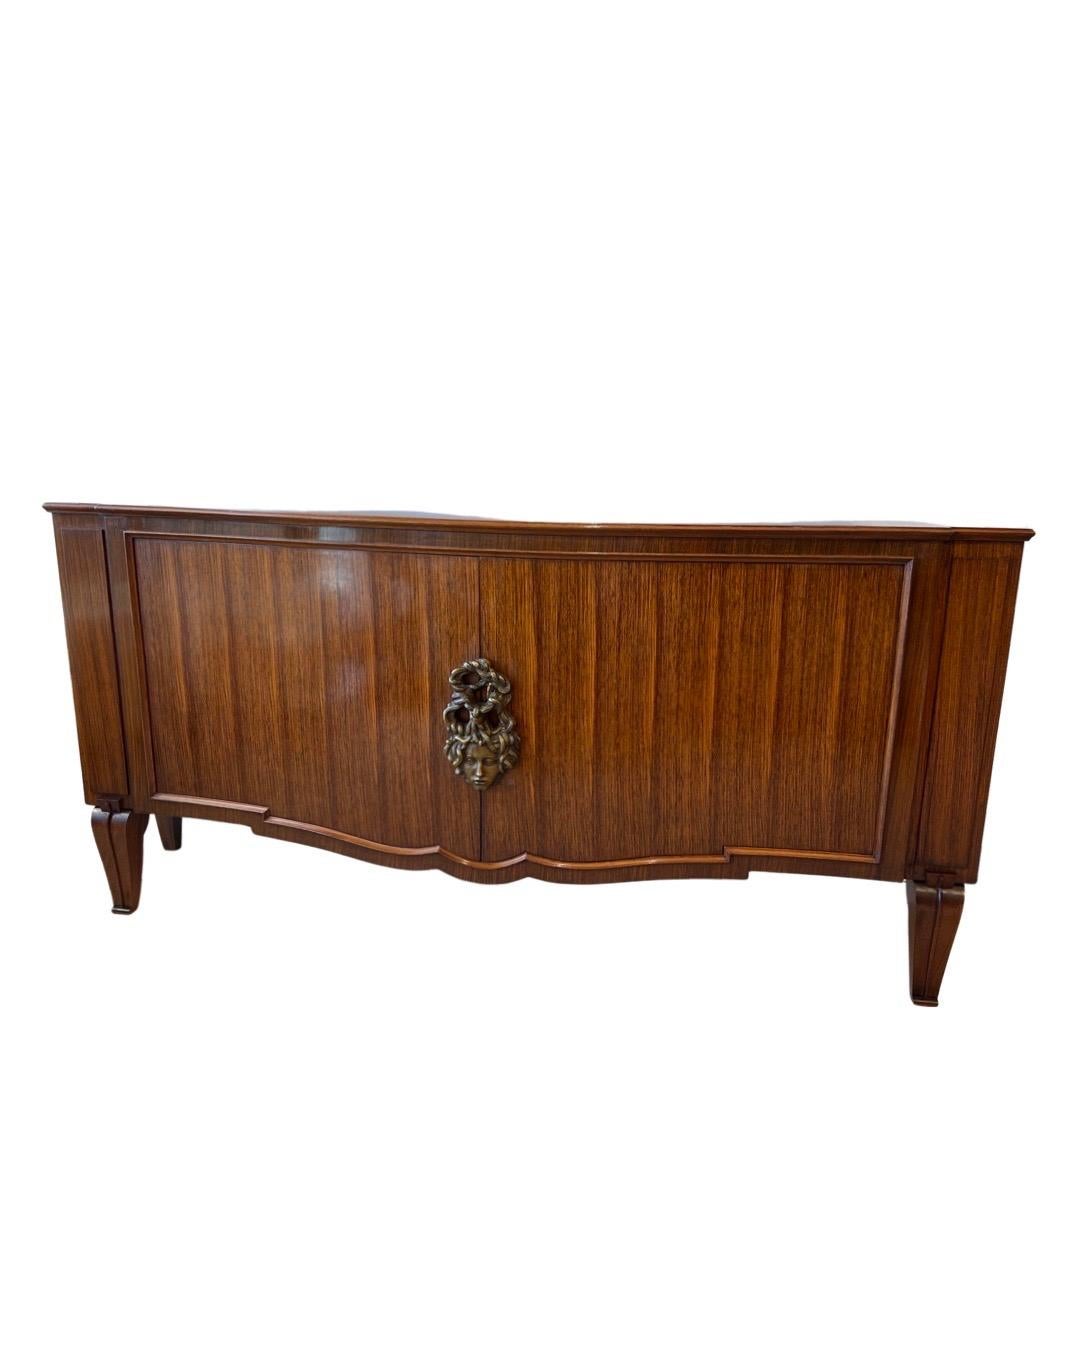 This Art Deco 2-door buffet/cabinet with cleaned designed lines was constructed in 1937 by Andre Arbus in solid Rosewood with a signed Androussov's Bronze Medalion lock of 